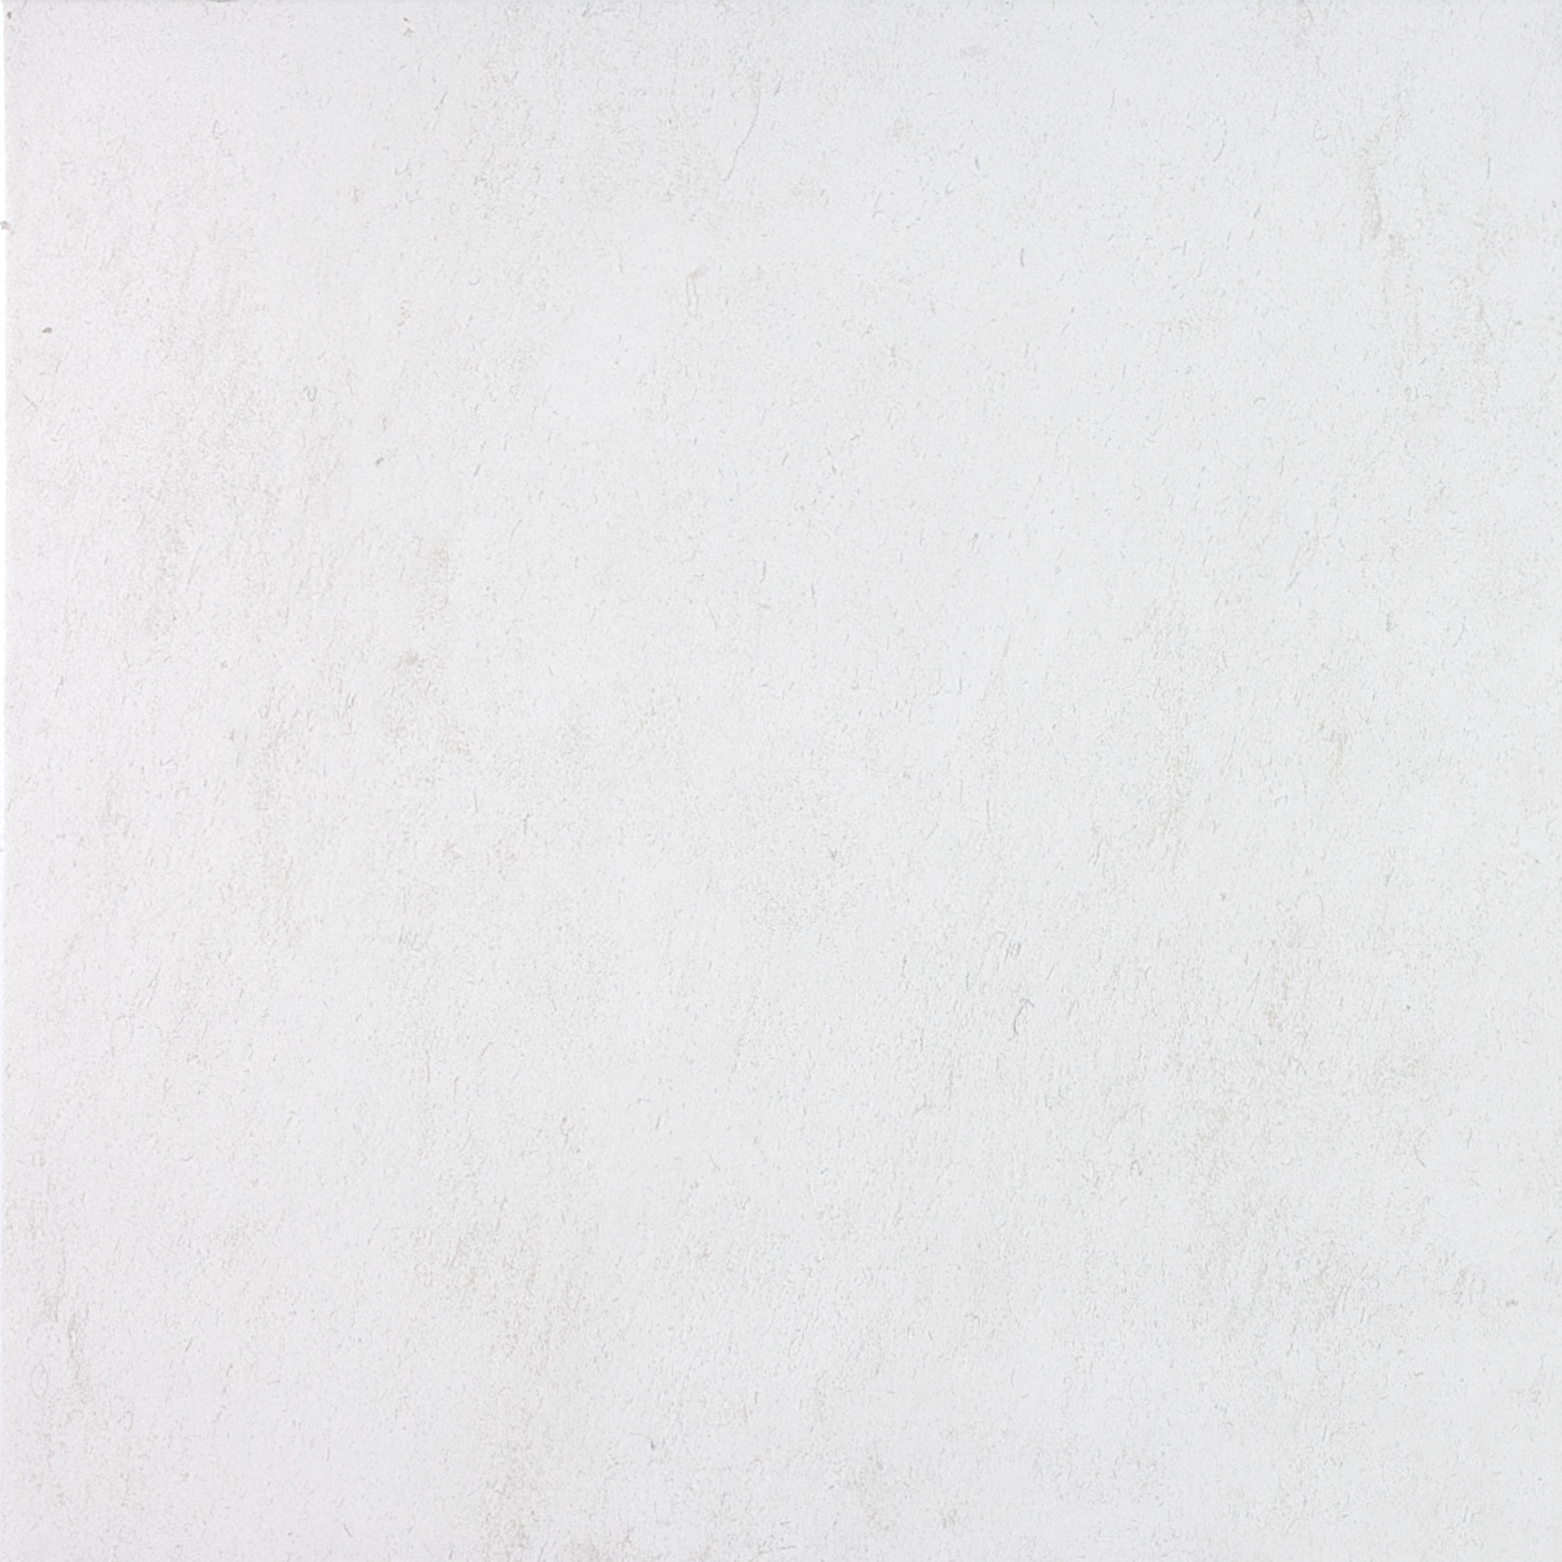 white pattern glazed porcelain field tile from cinq anatolia collection distributed by surface group international matte finish pressed edge 13x13 square shape